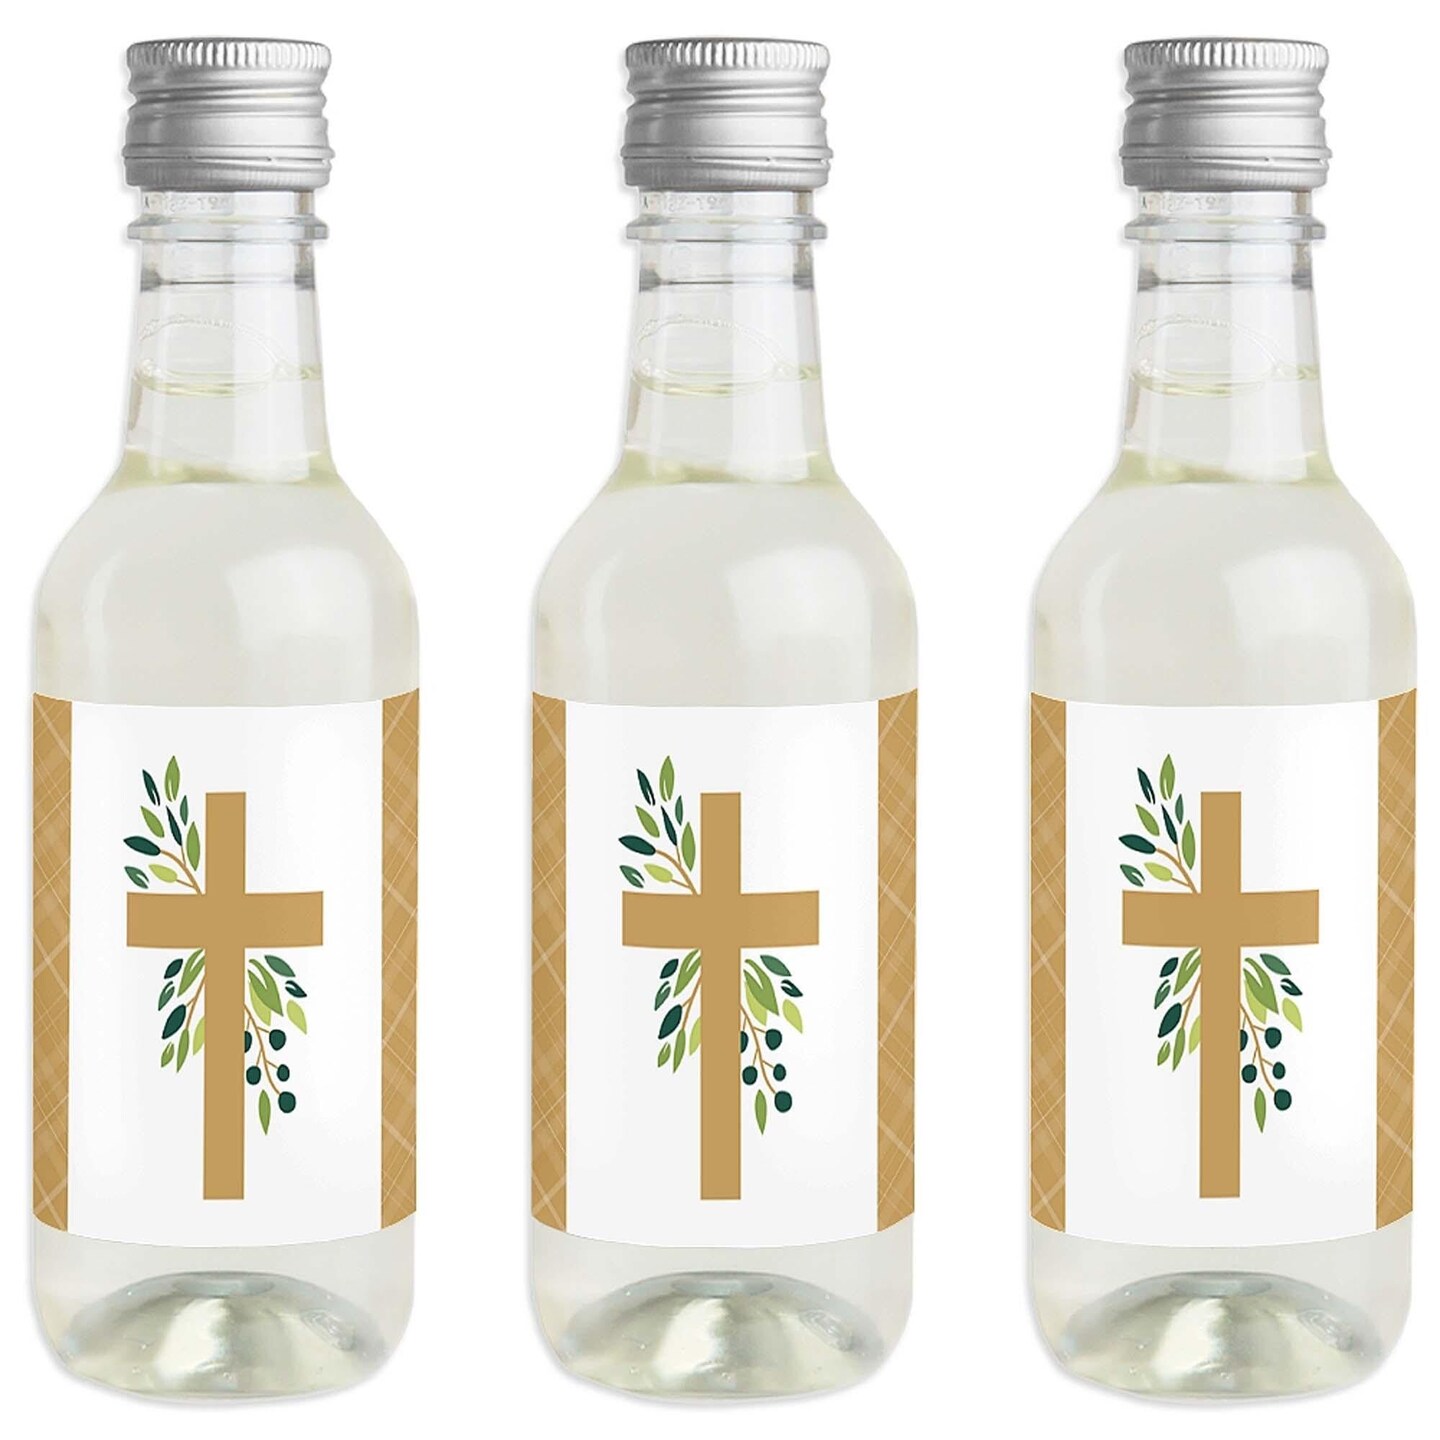 Big Dot of Happiness Elegant Cross - Mini Wine and Champagne Bottle Label Stickers - Religious Party Favor Gift for Women and Men - Set of 16